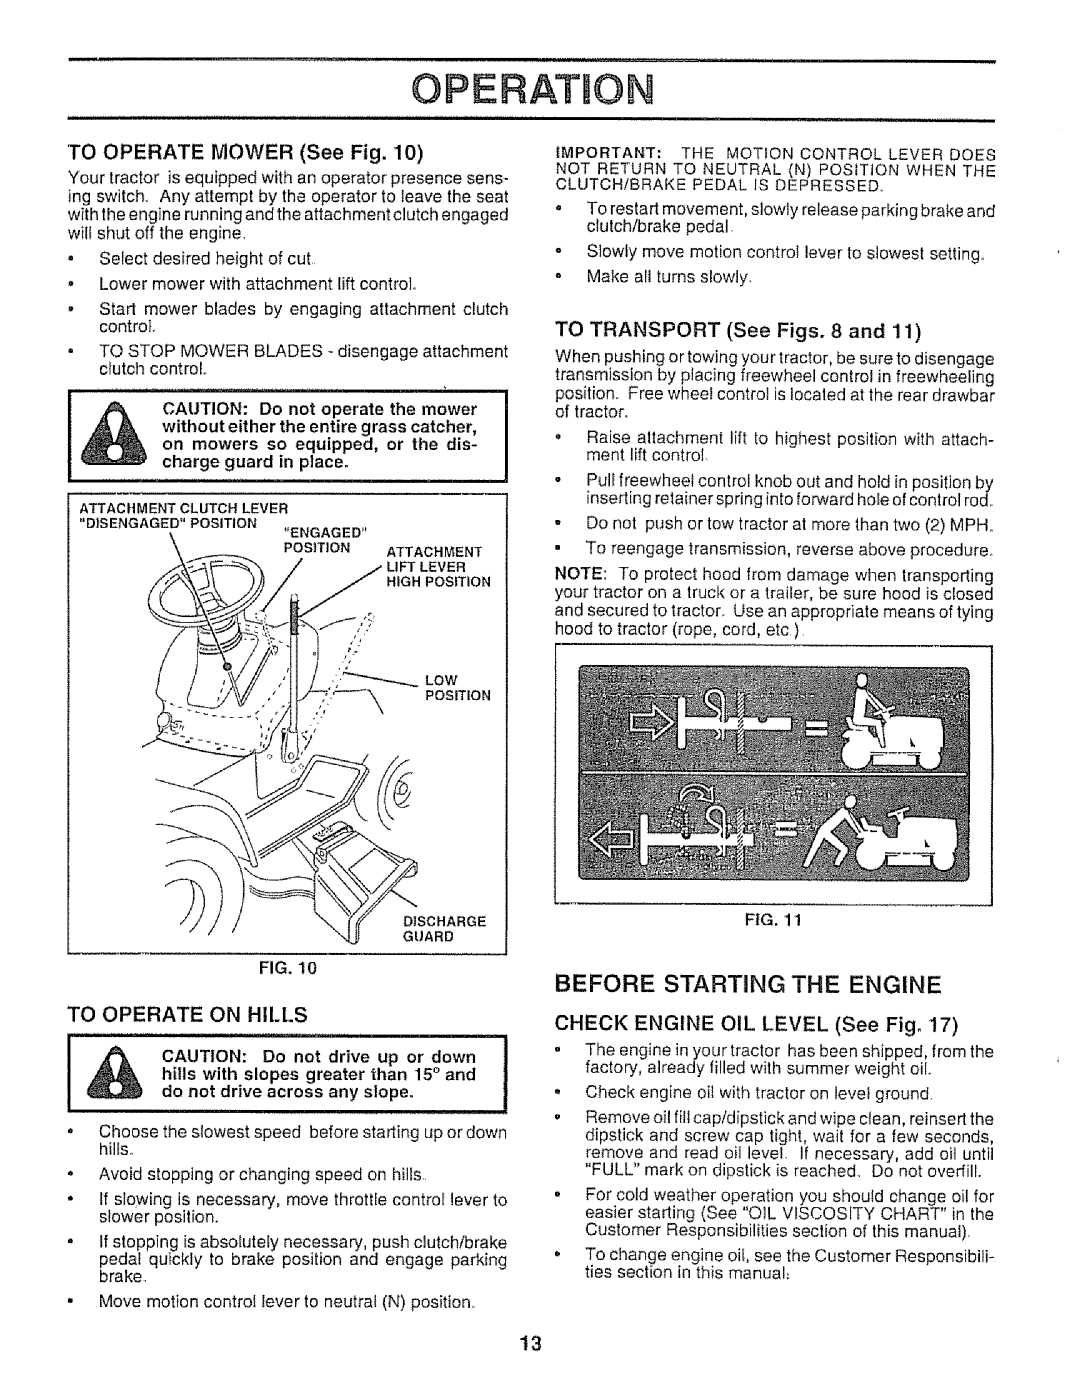 Sears 917.25953 owner manual Operatuo, Before Starting The Engine, To Operate On Hills, CHECK ENGINE OIL LEVEL See Fig 